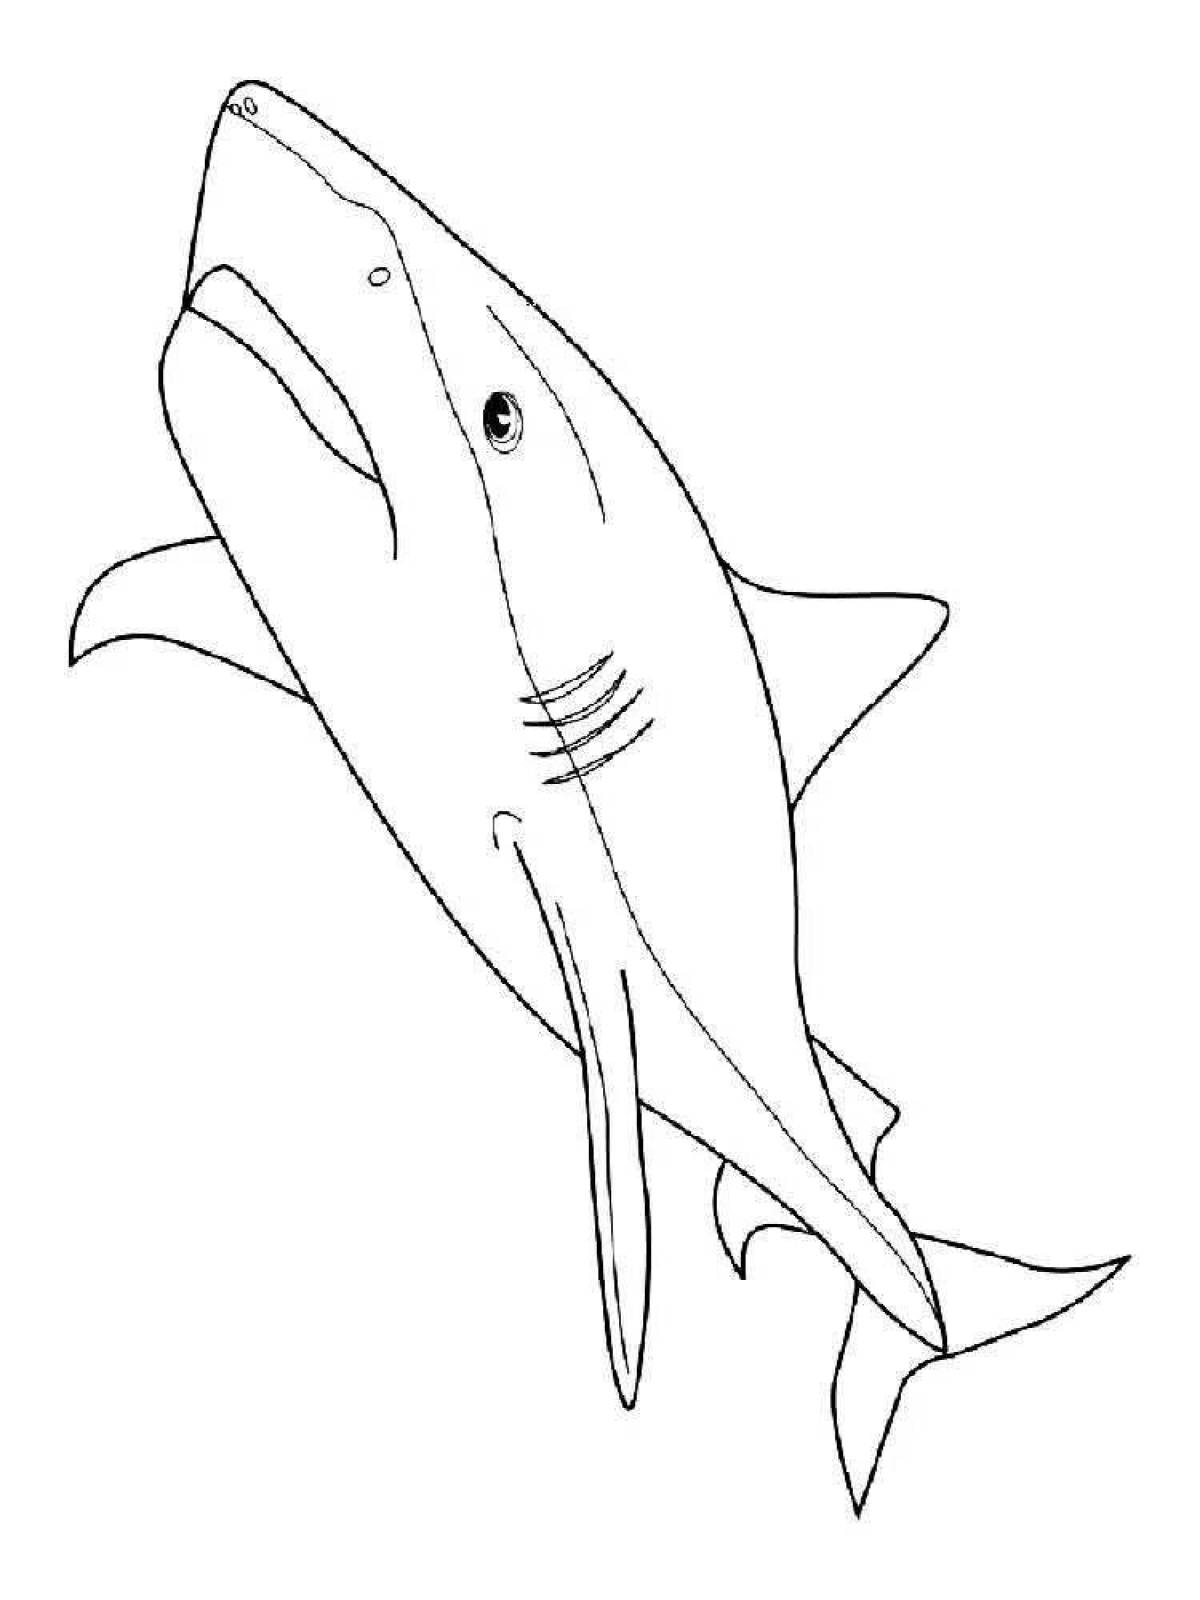 Impressive shark coloring book from ikea